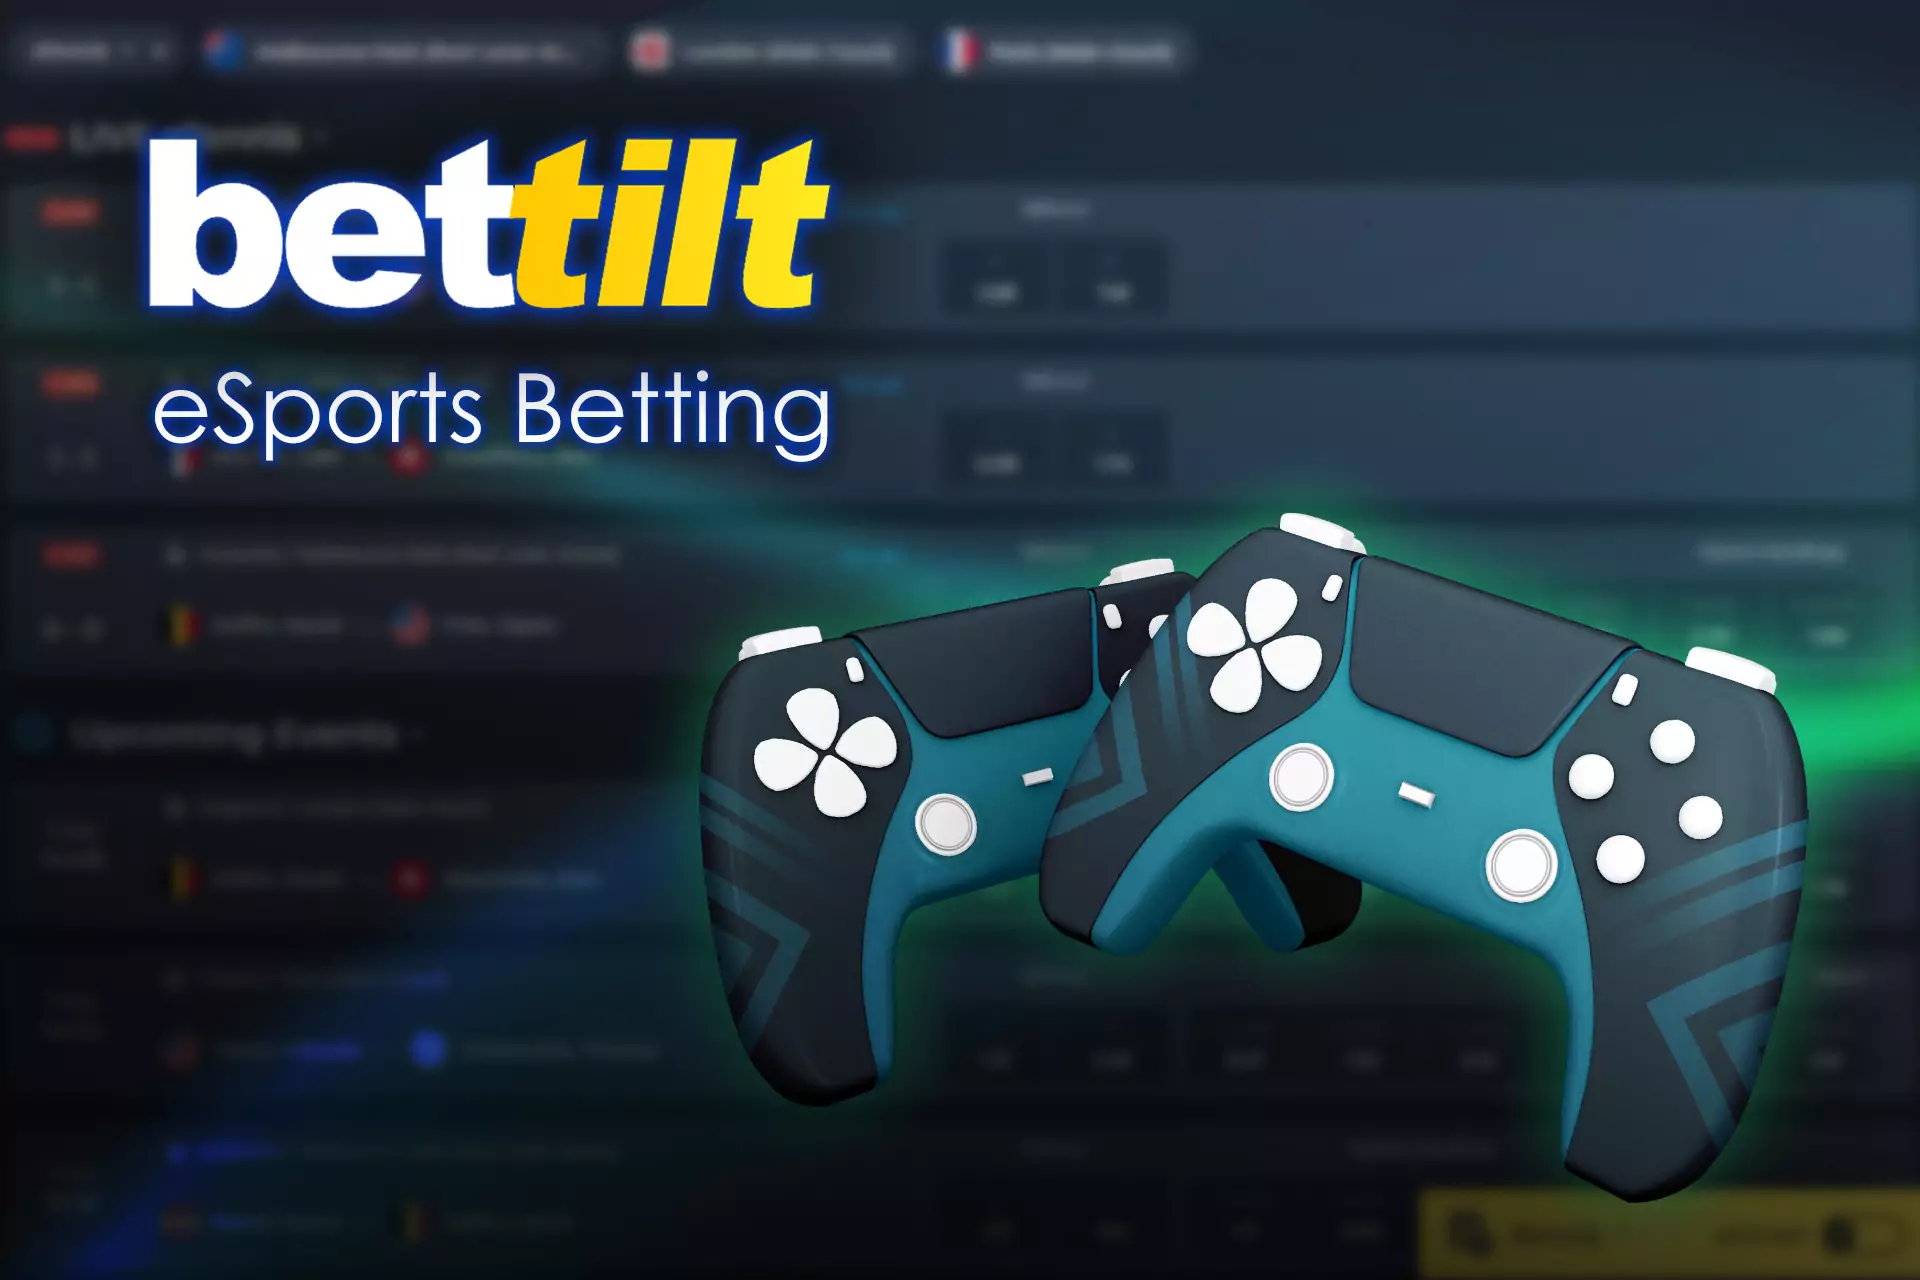 If you are an esports fan use the opportunity of betting on cybersports events.